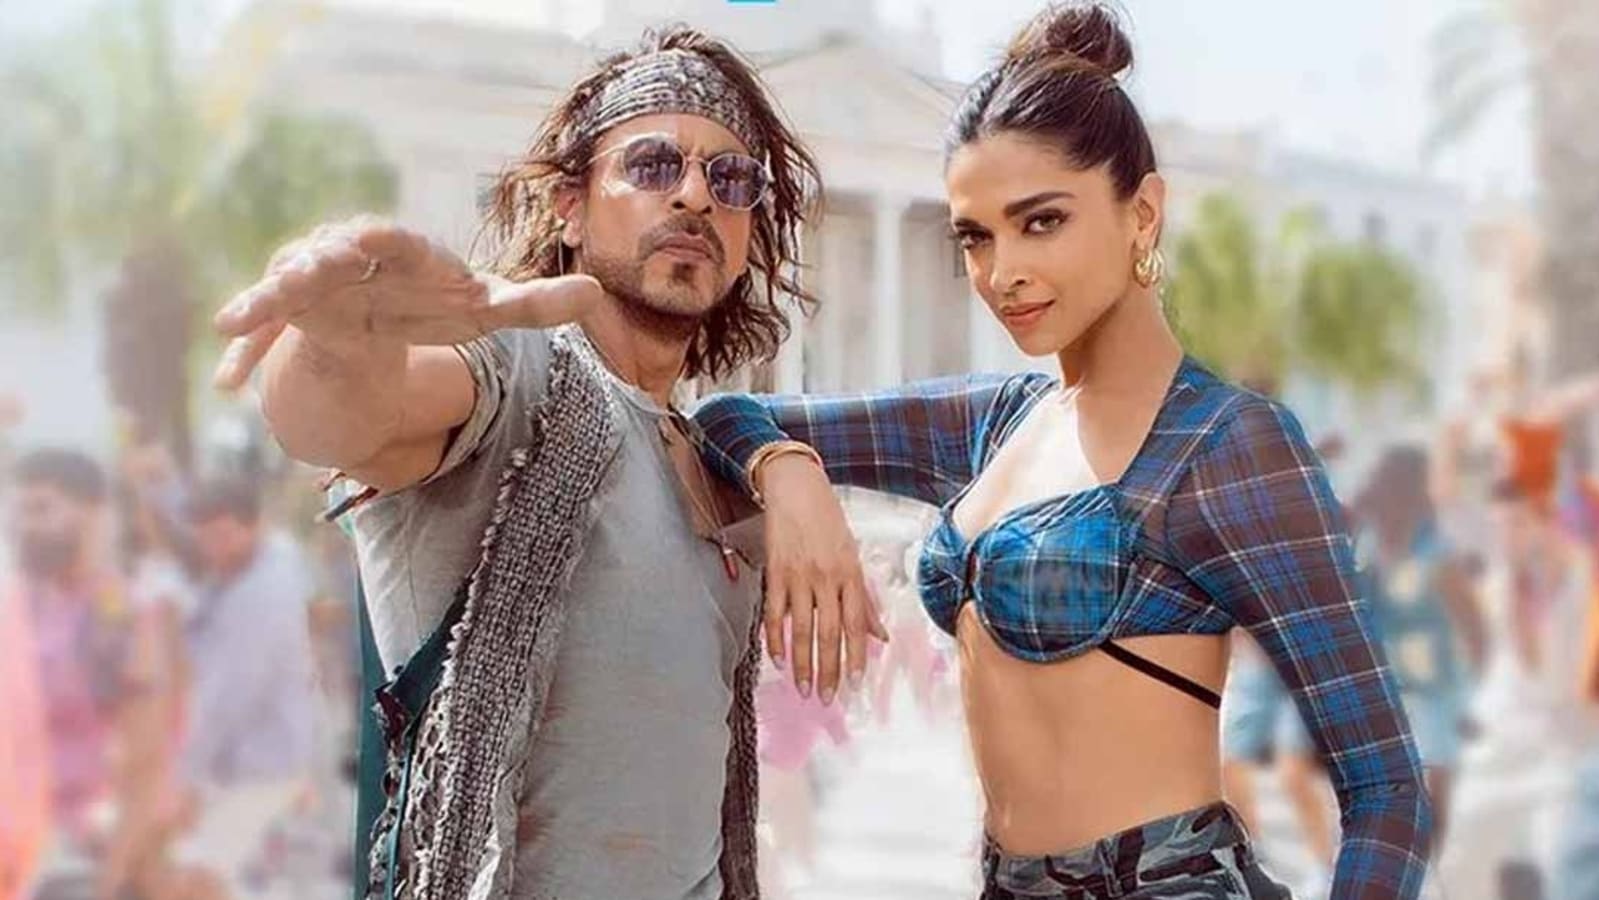 Shah Rukh Khan Says Deepika Padukone Has The Sexiest Fight Scene In Pathaan Bollywood 